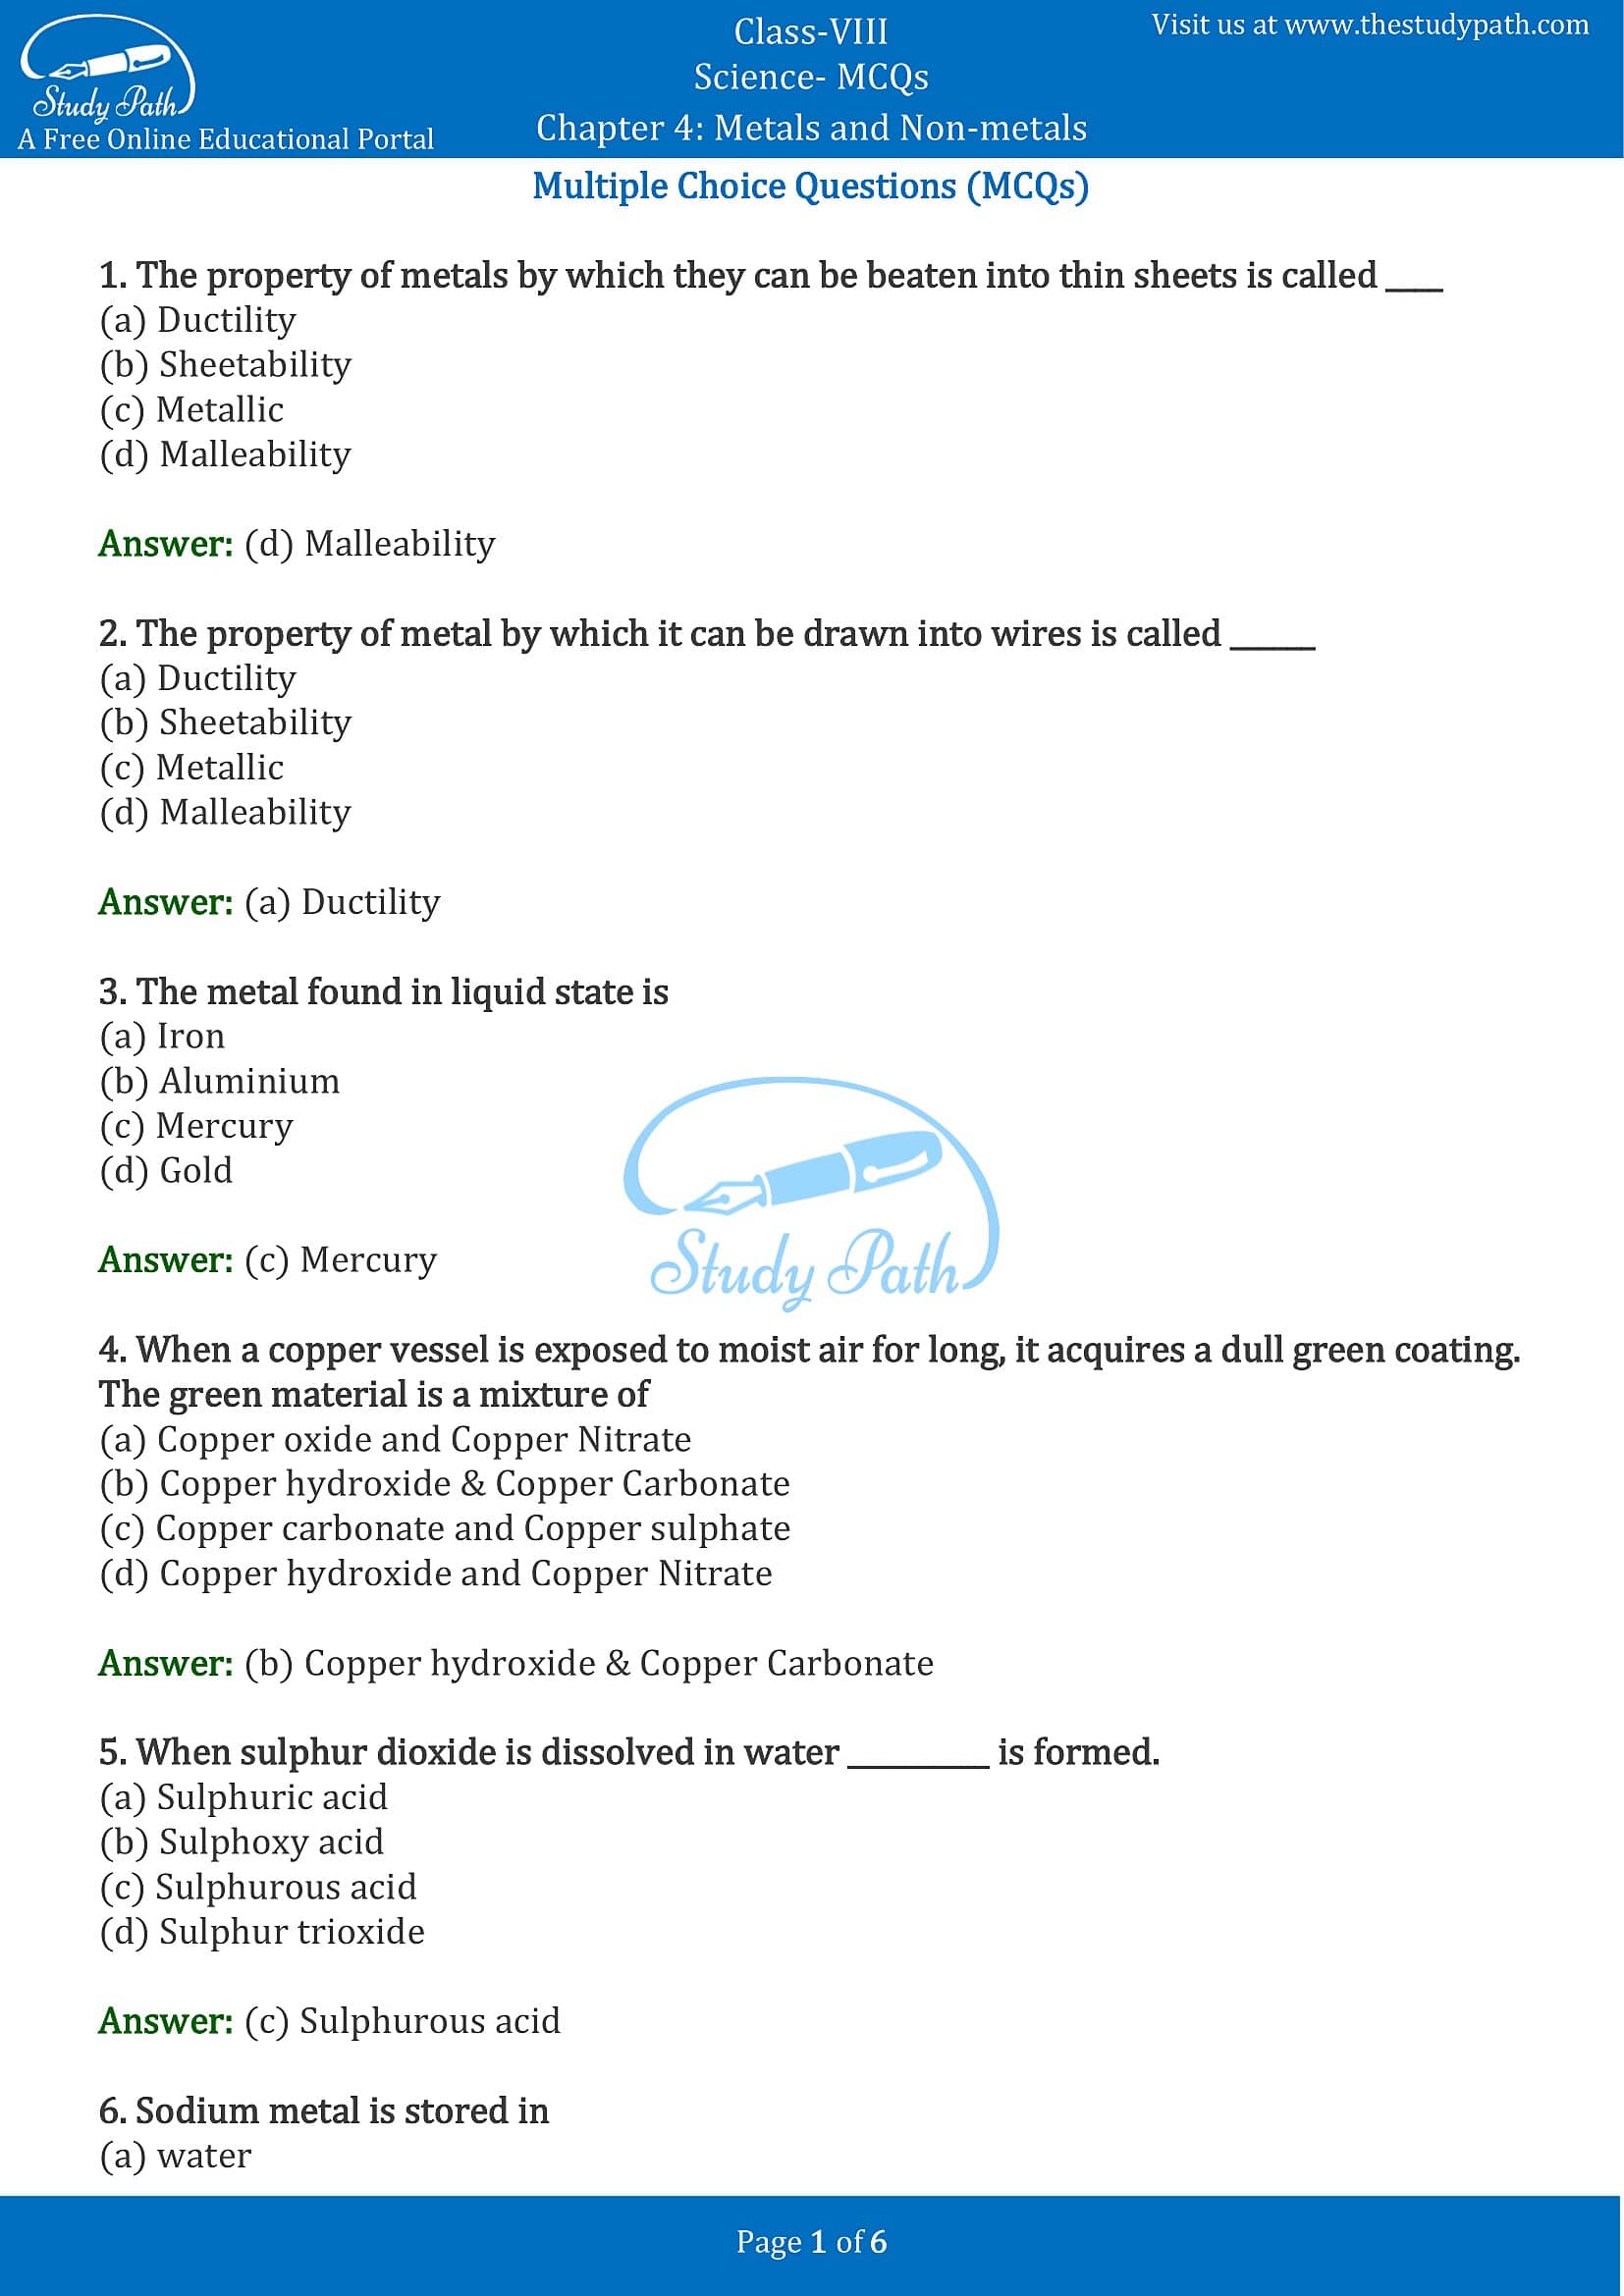 MCQ Questions for Class 8 Science Chapter 4 Metals and Non-metals with Answers PDF -1